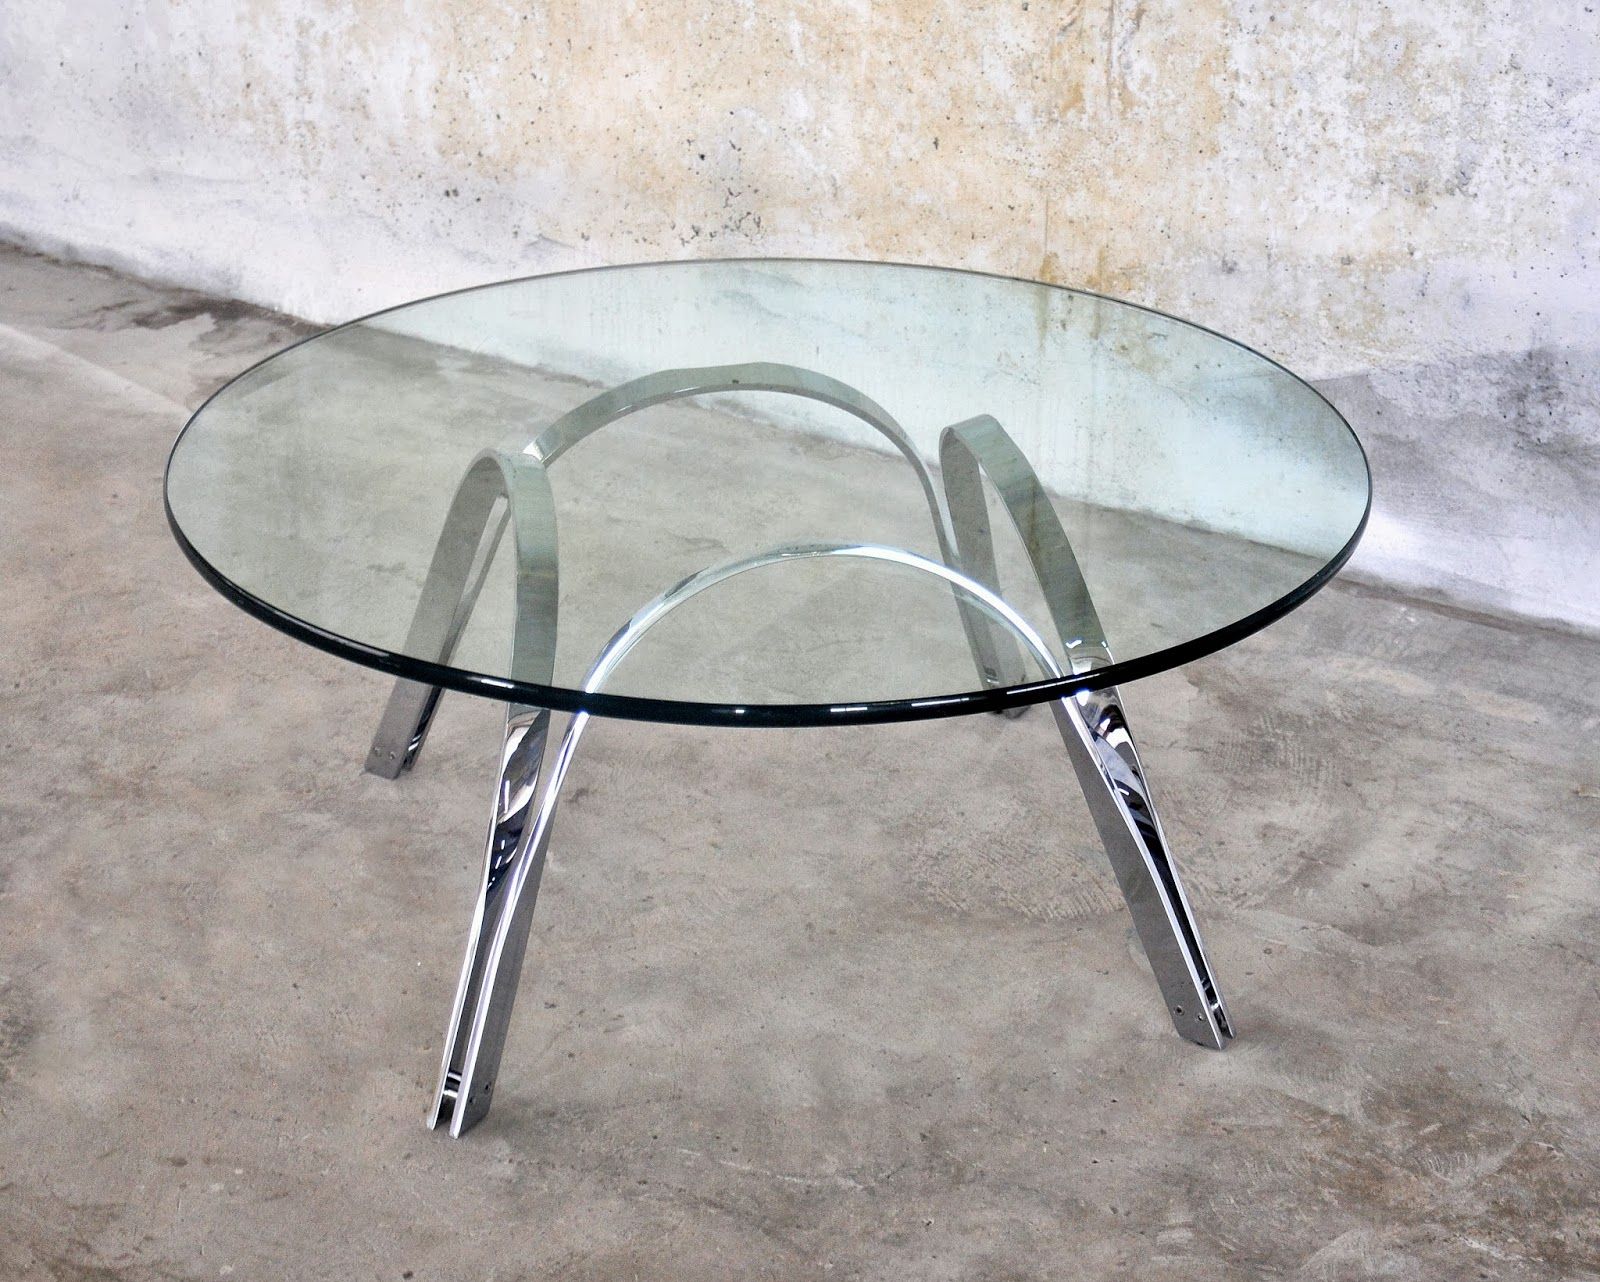 Recent Select Modern: Roger Sprunger Chrome & Glass Coffee Or With Regard To Polished Chrome Round Cocktail Tables (View 3 of 20)